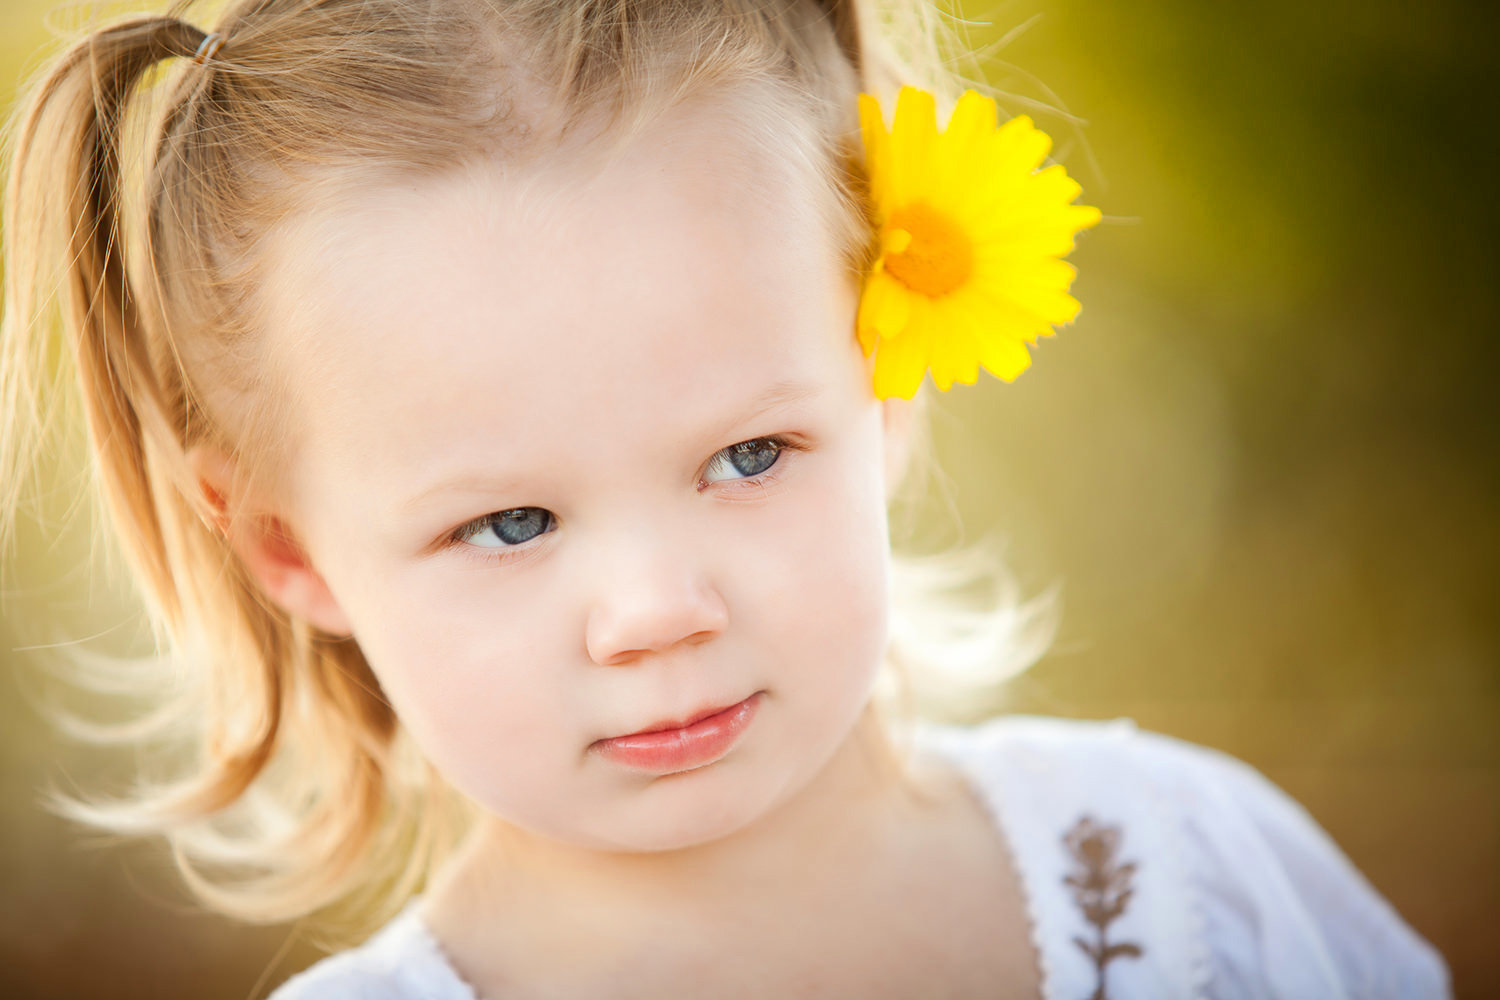 san diego family photographer | little girl with flowers in her hair slight smiling